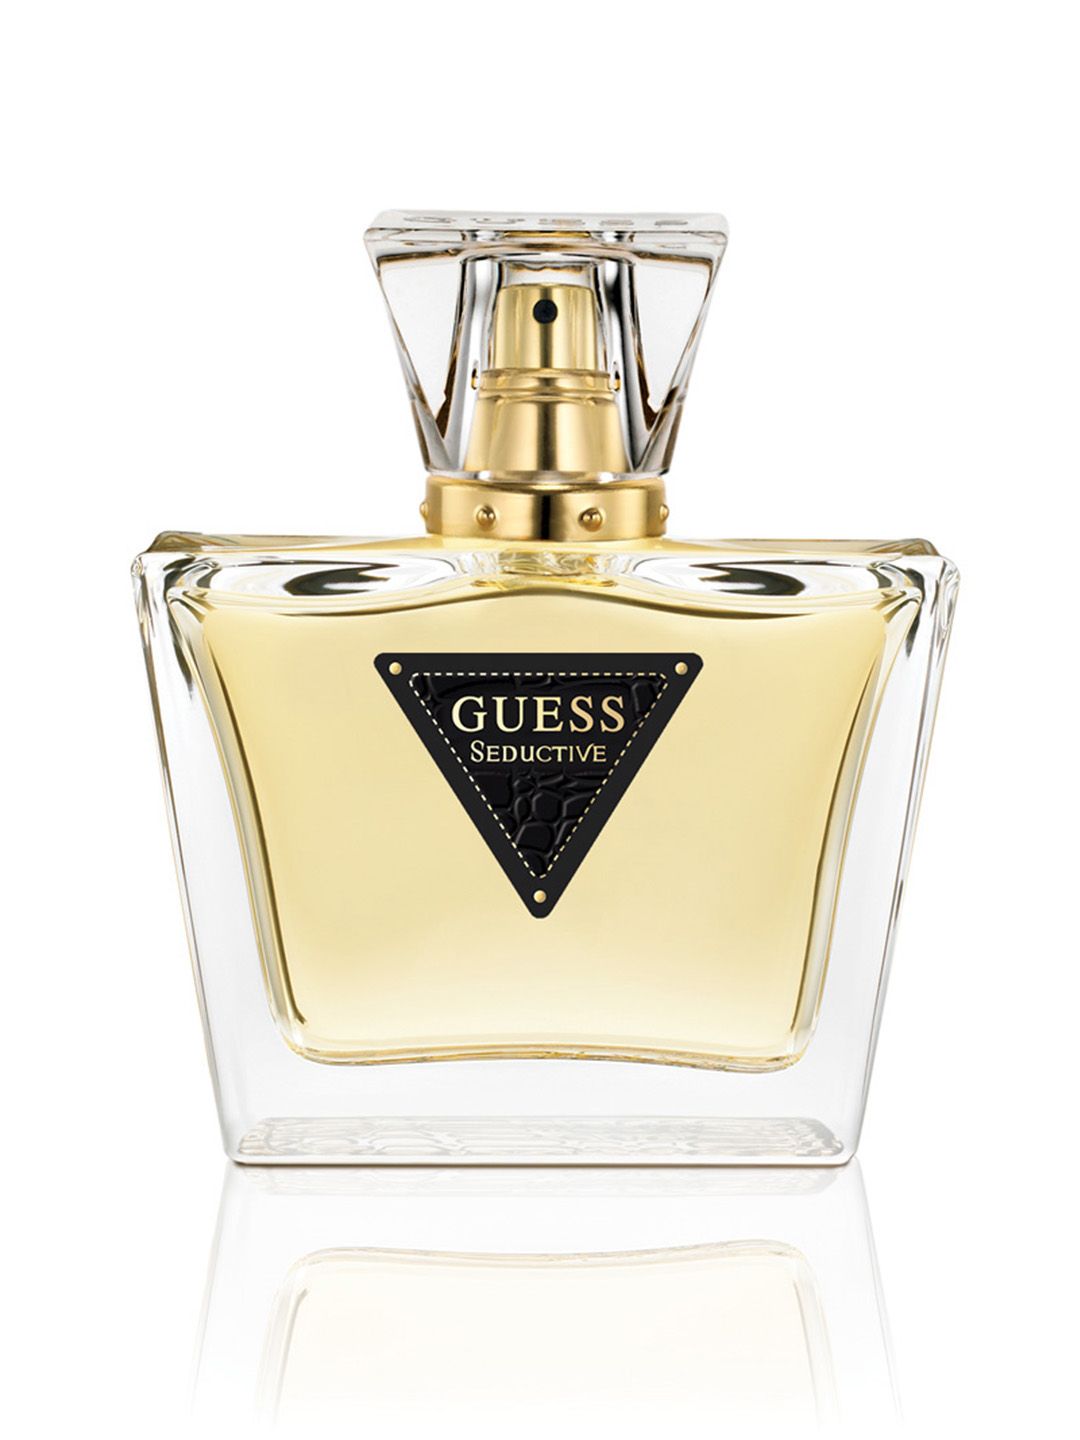 GUESS Women Seductive EDT Spray Price in India